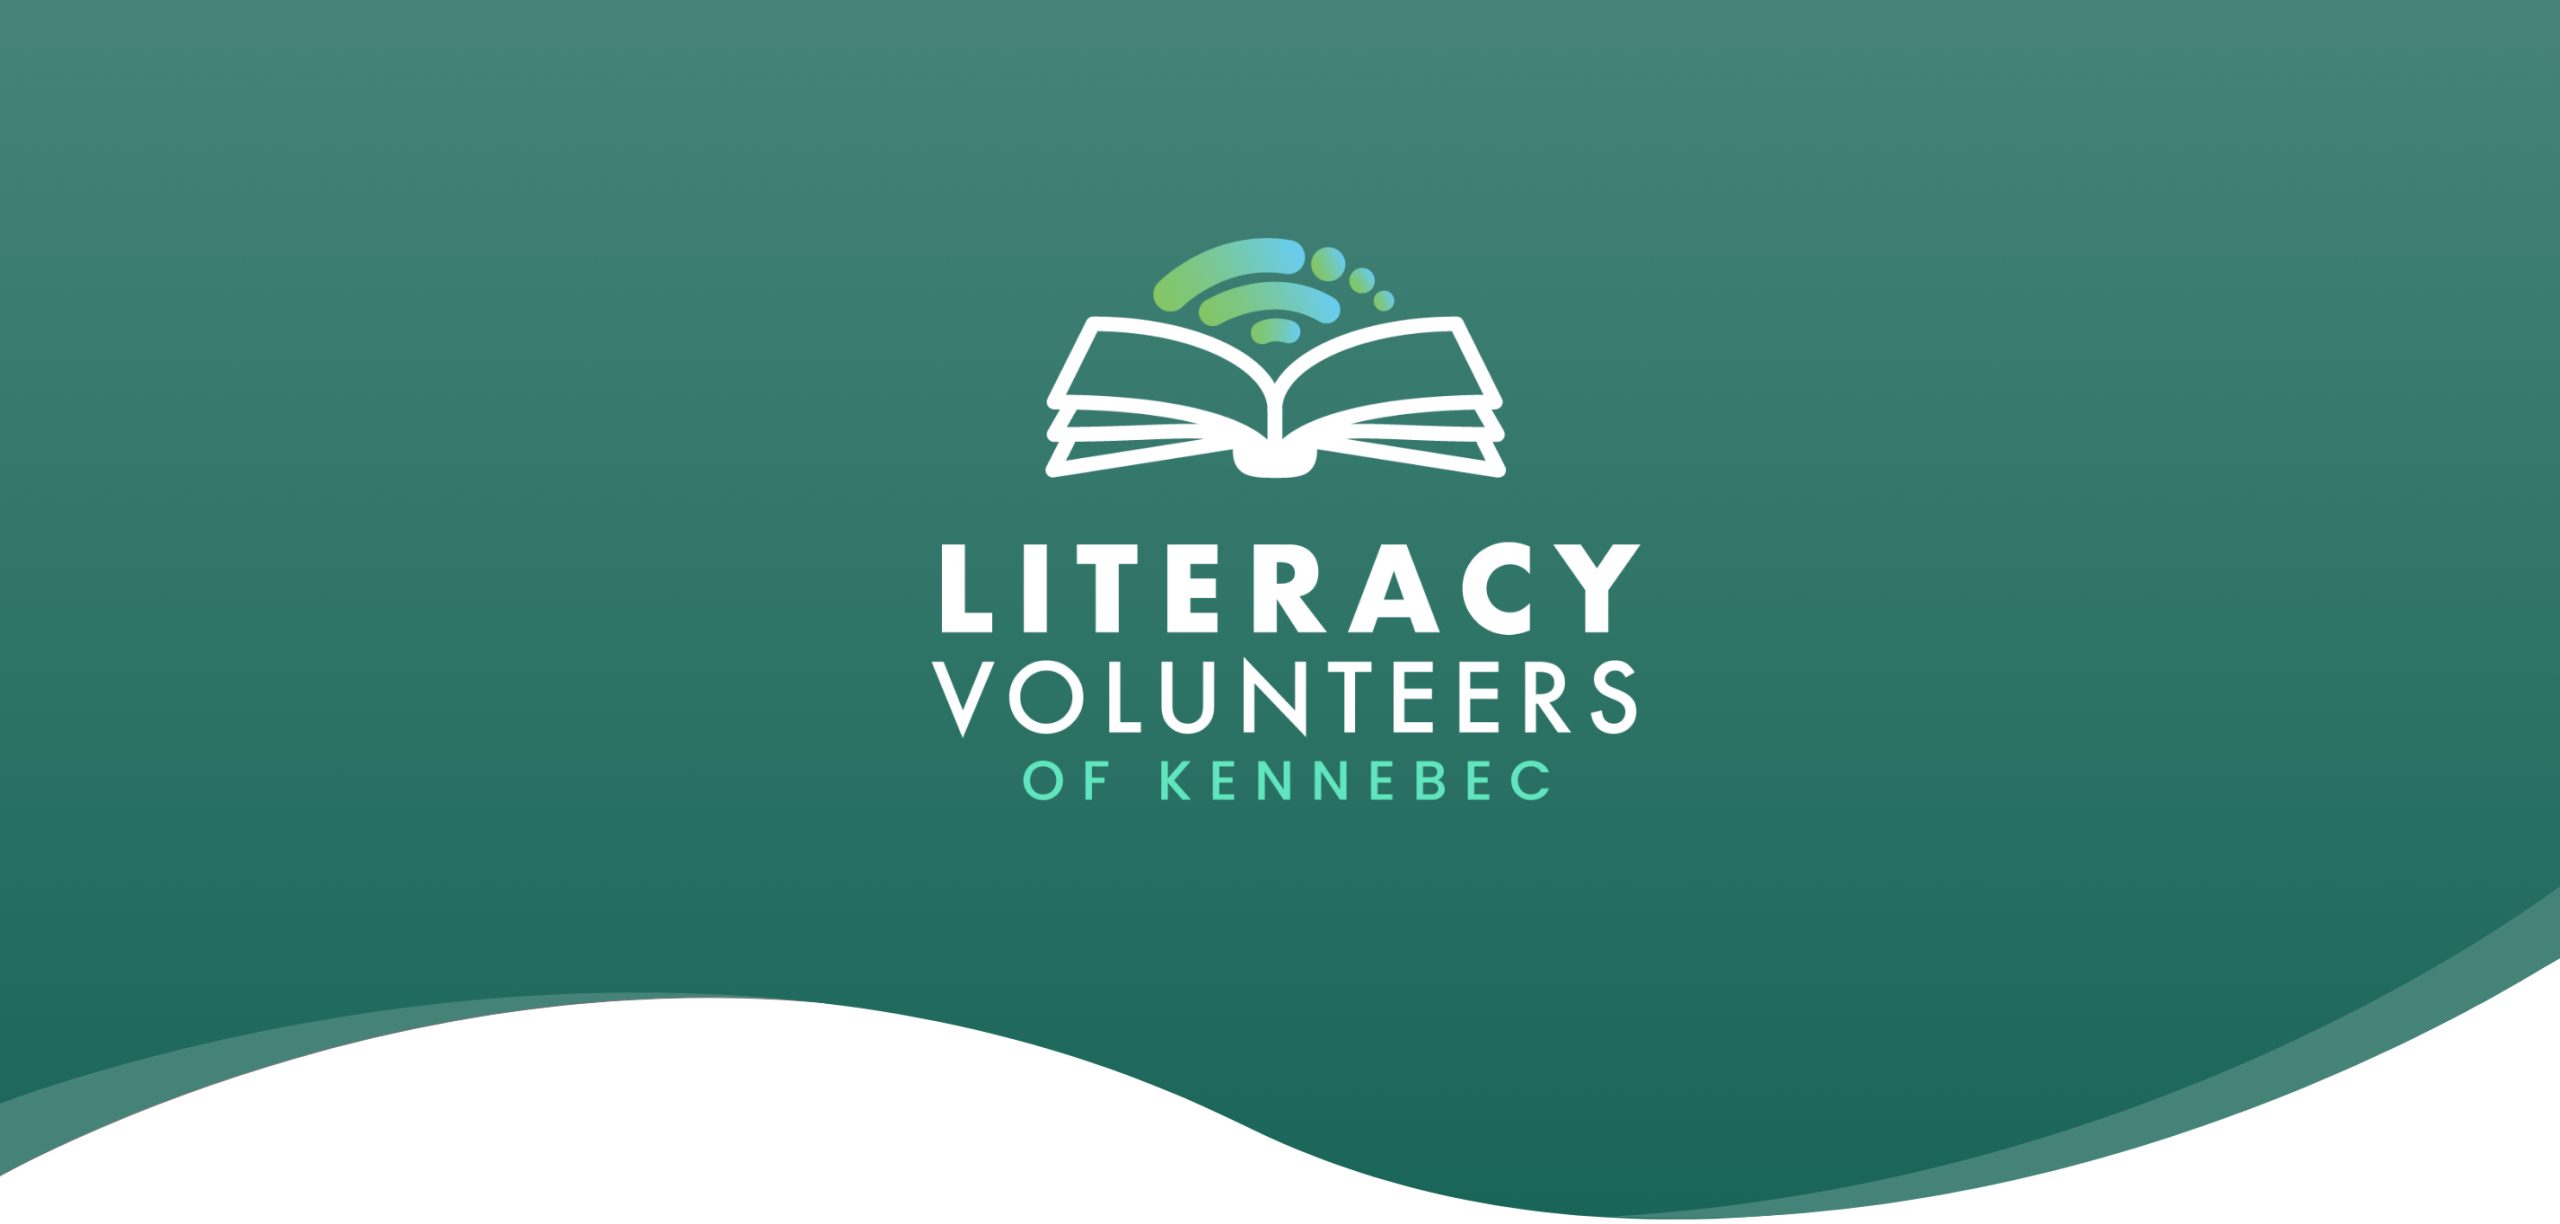 Literacy-Vol-Kennebec-2023-scaled image